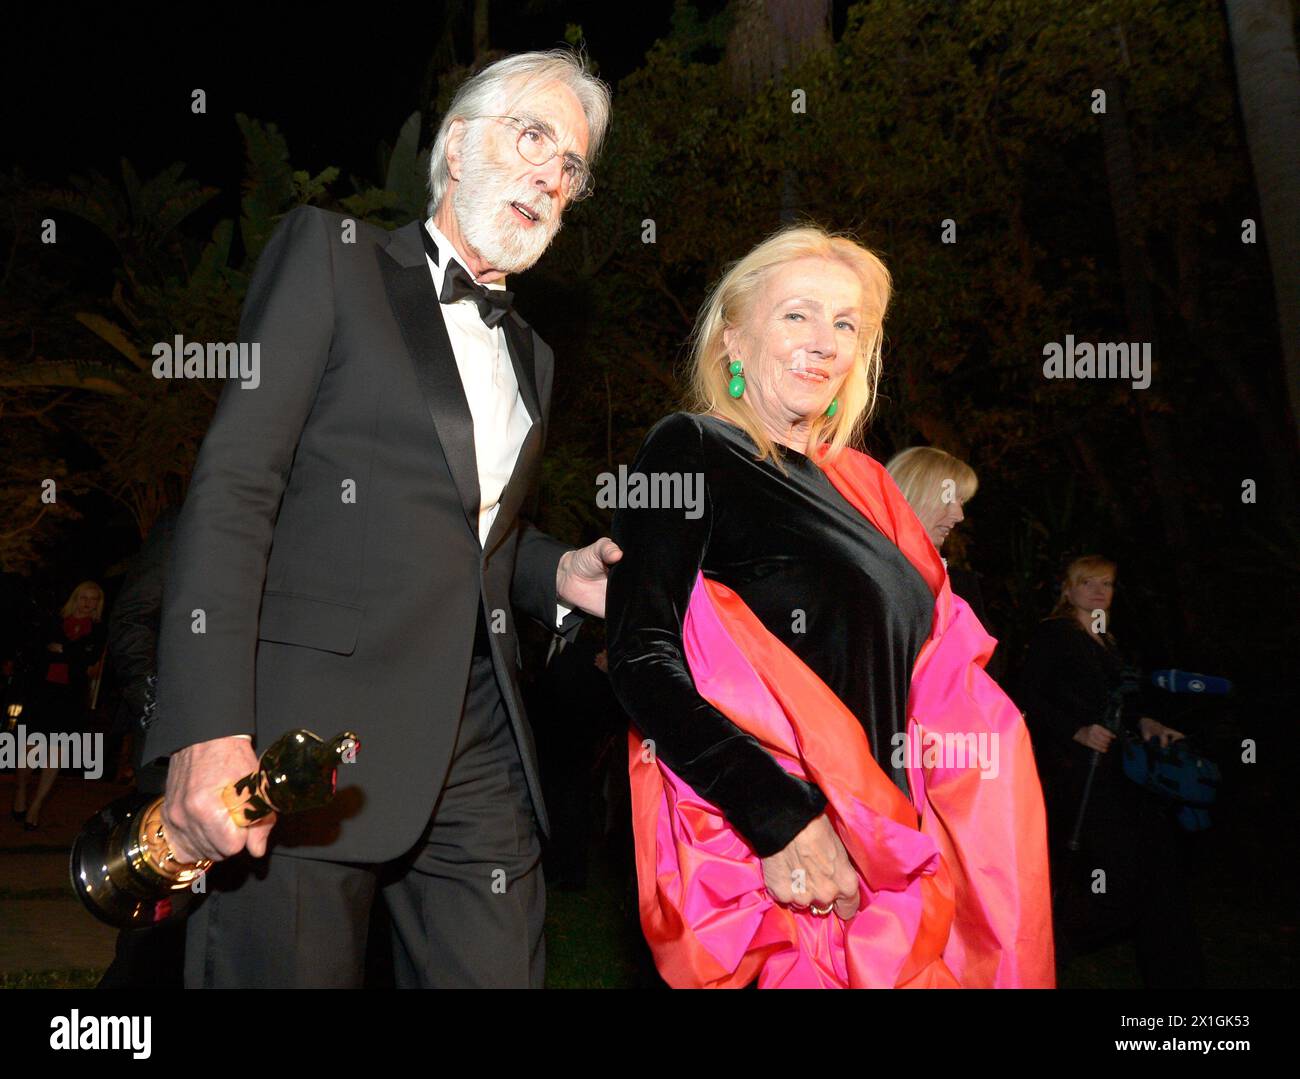 Austrian director Michael Haneke received an Oscar for Best Foreign Language Film of the Year for 'Amour' during the 85th Academy Awards at the Dolby Theatre in Hollywood, California, USA, 24 February 2013.    PICTURE: Michael Haneke and his wife Susanne. - 20130225 PD0266 - Rechteinfo: Rights Managed (RM) Stock Photo